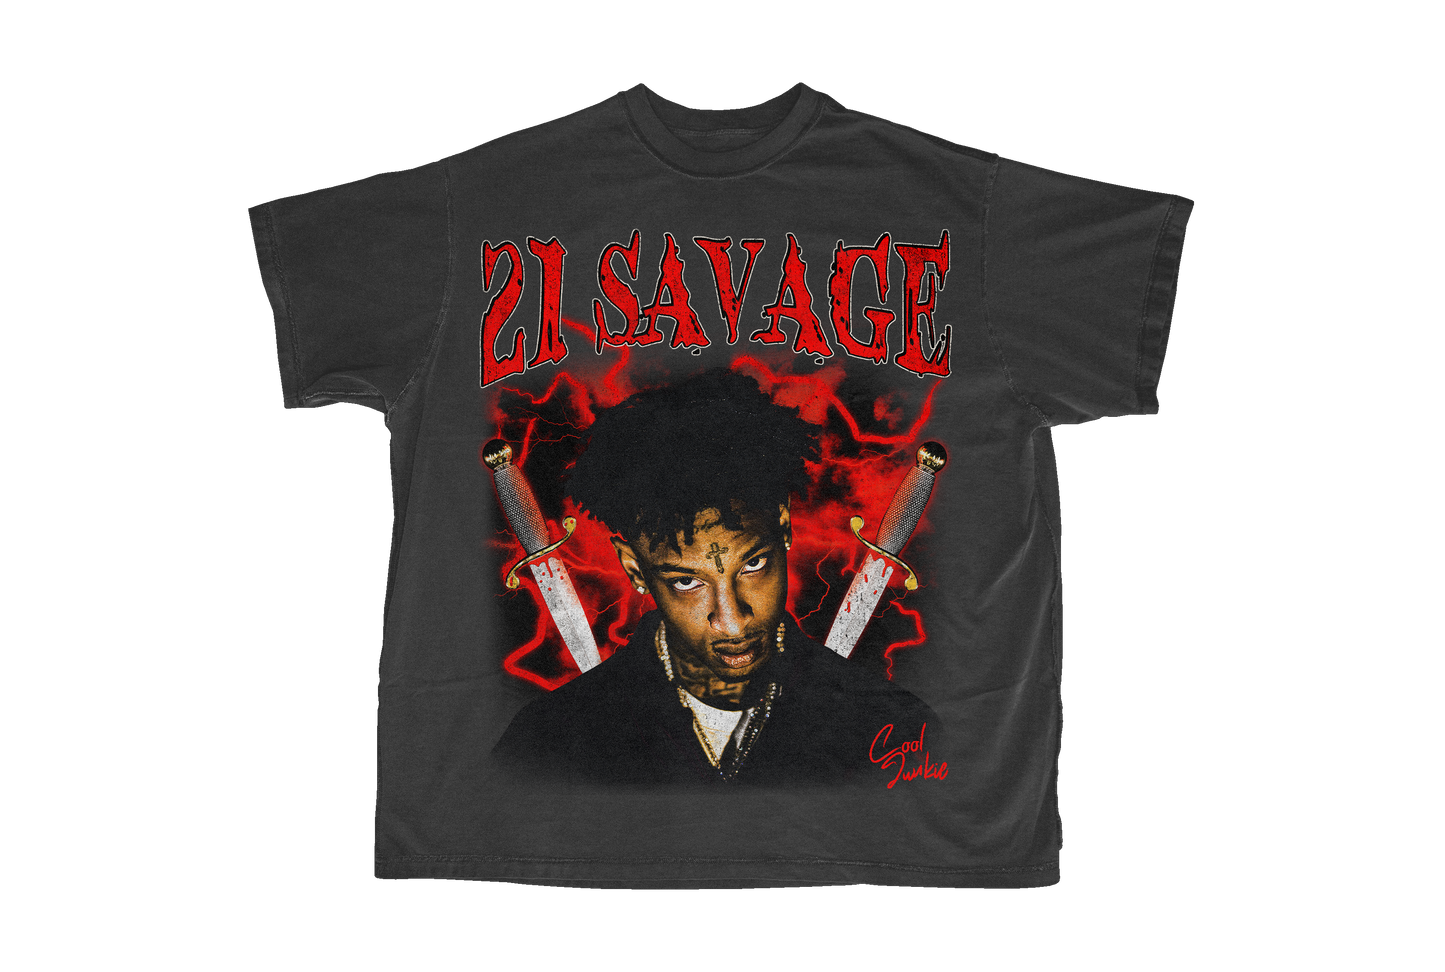 21 Savage Grey Tee with red as the main color in the design